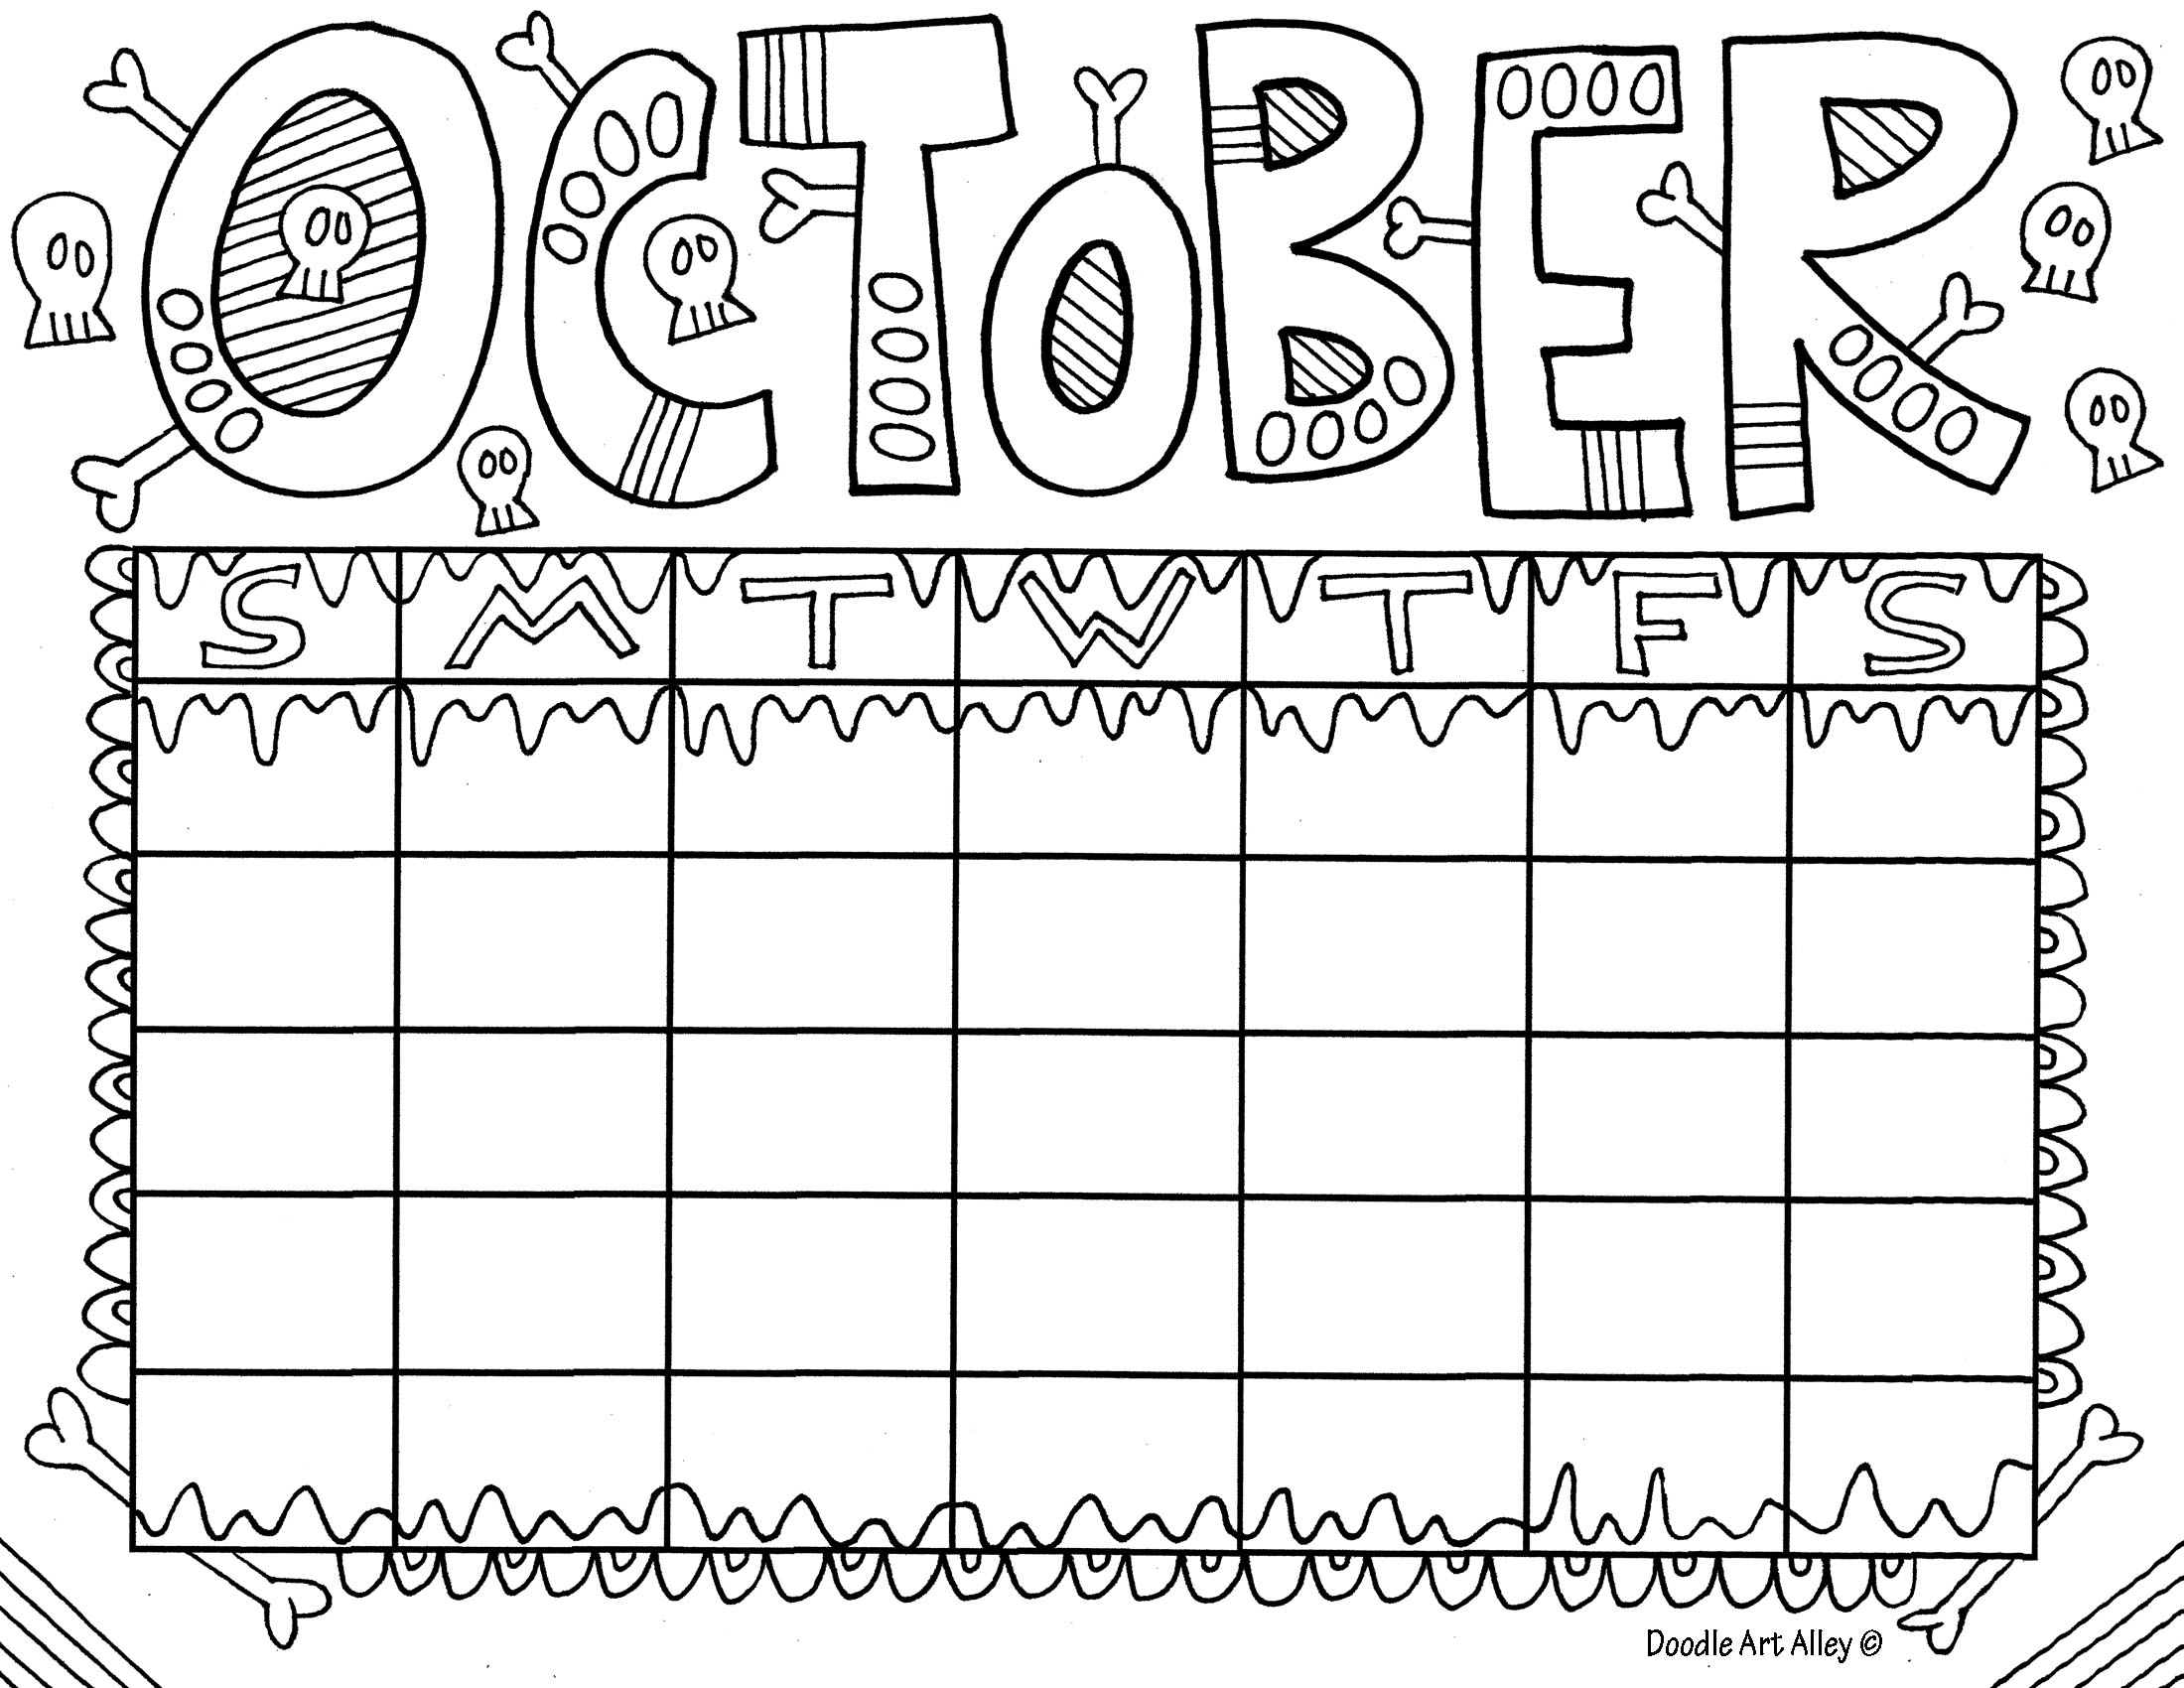 October Coloring Pages DOODLE ART ALLEY